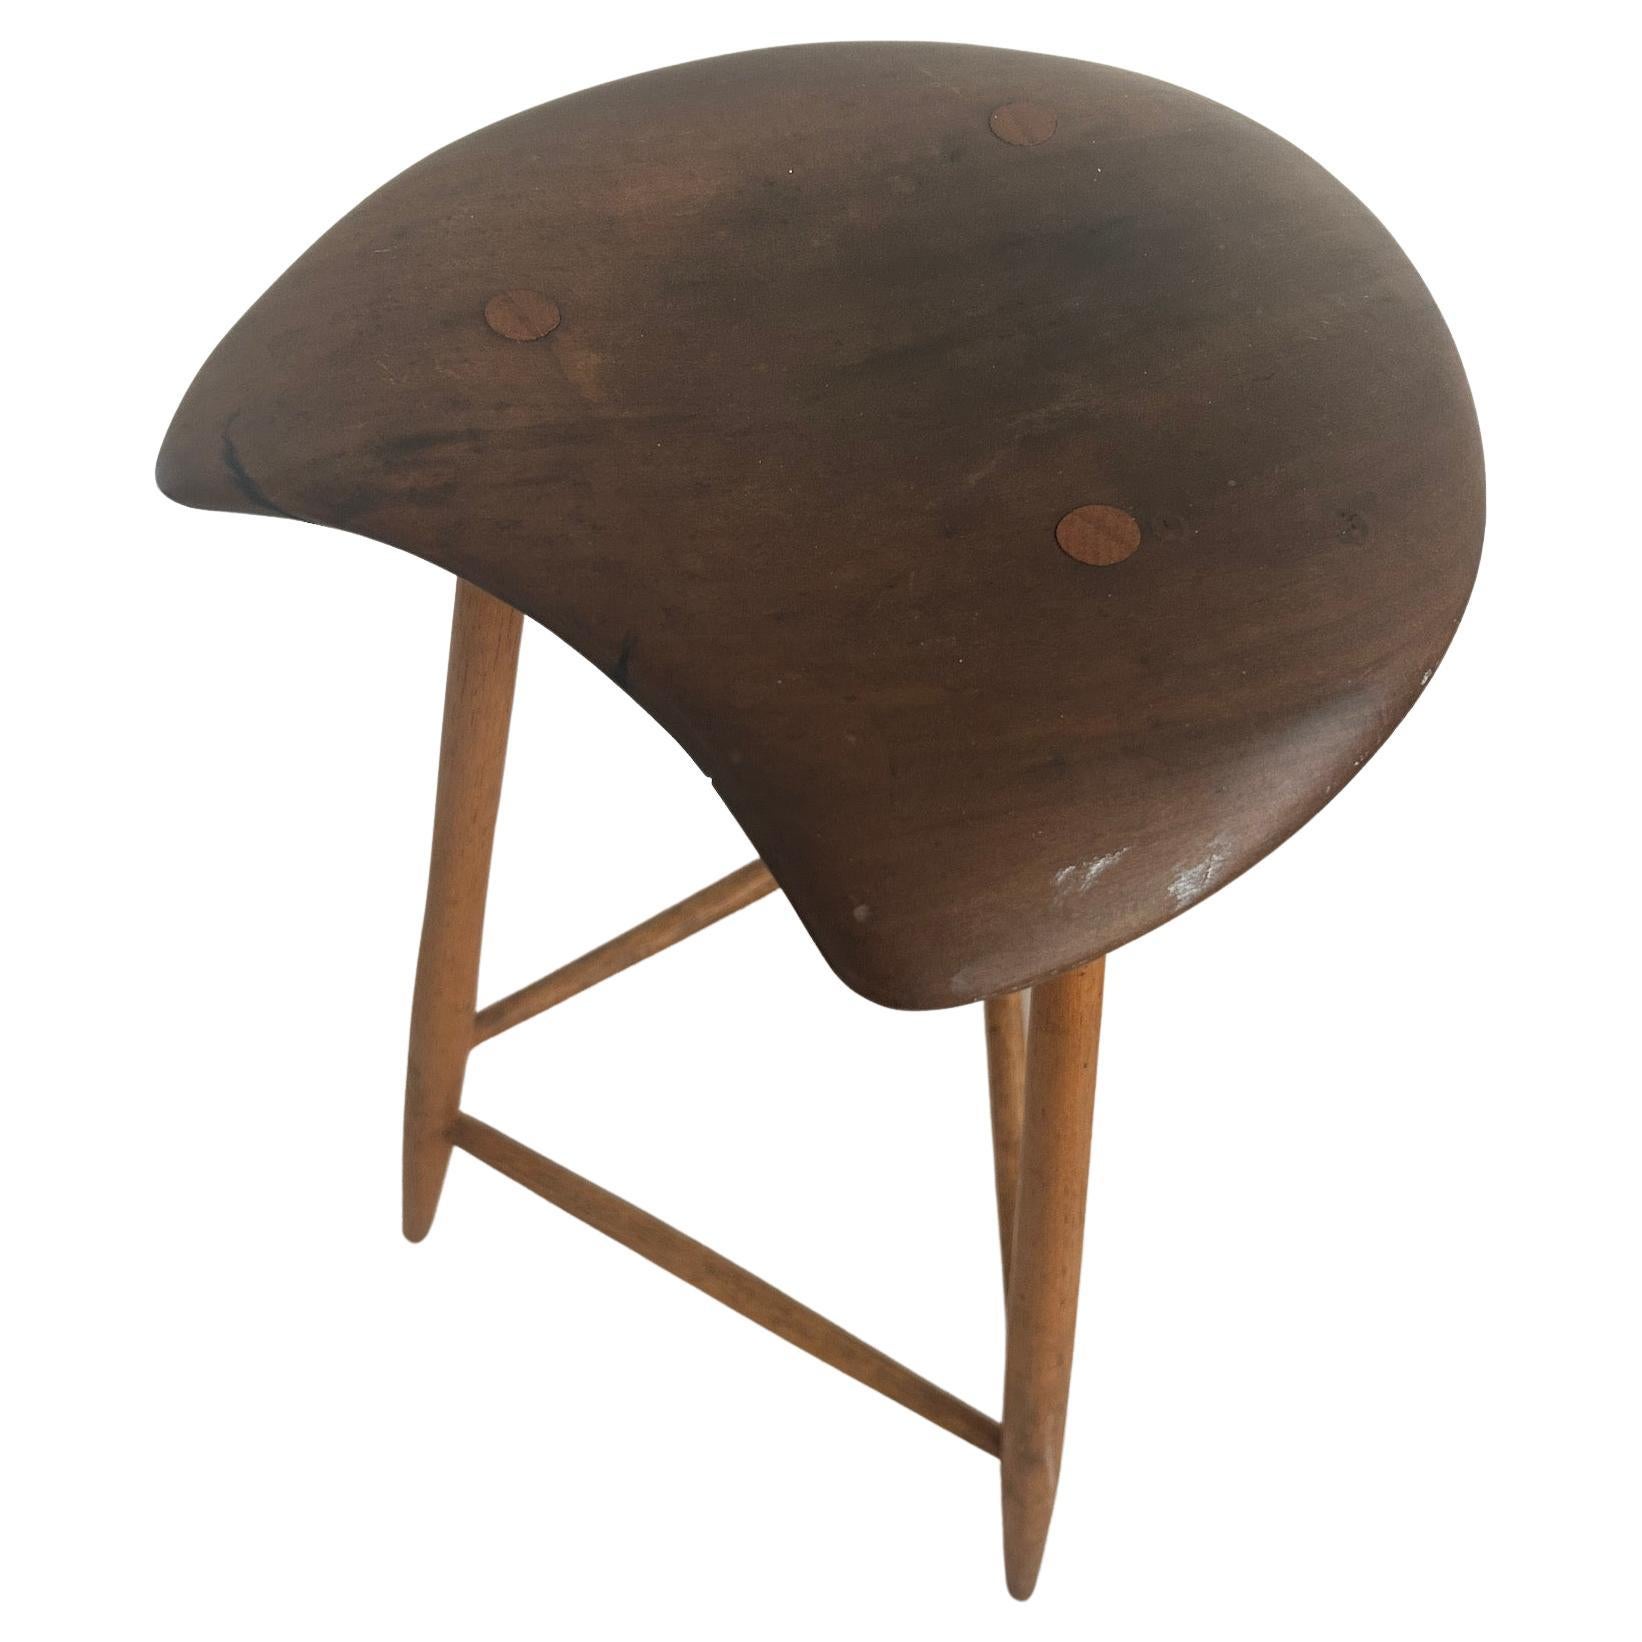 American Studio Craft Organic woodwork stool by Wharton Esherick student - Woodworker - Horace B. Hartshaw. Has a freeform seat supported by three splayed legs and signed on underside HBH 1981. Made in PA USA. Shows normal signs of use from age -